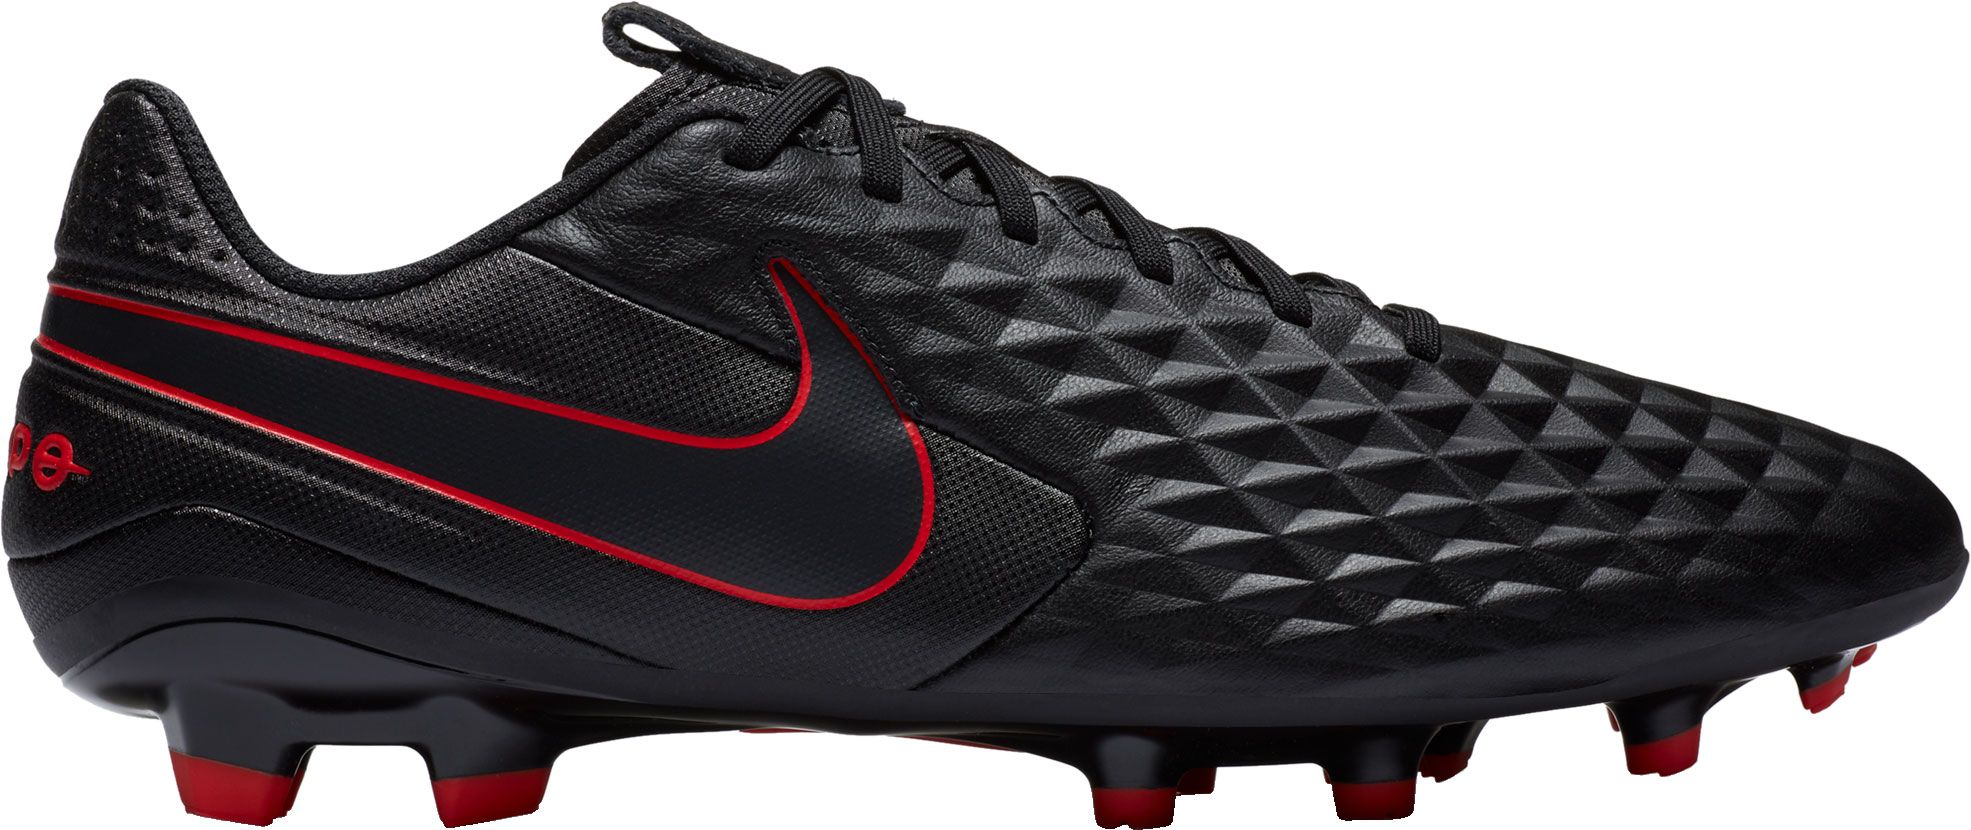 academy sports mens soccer cleats